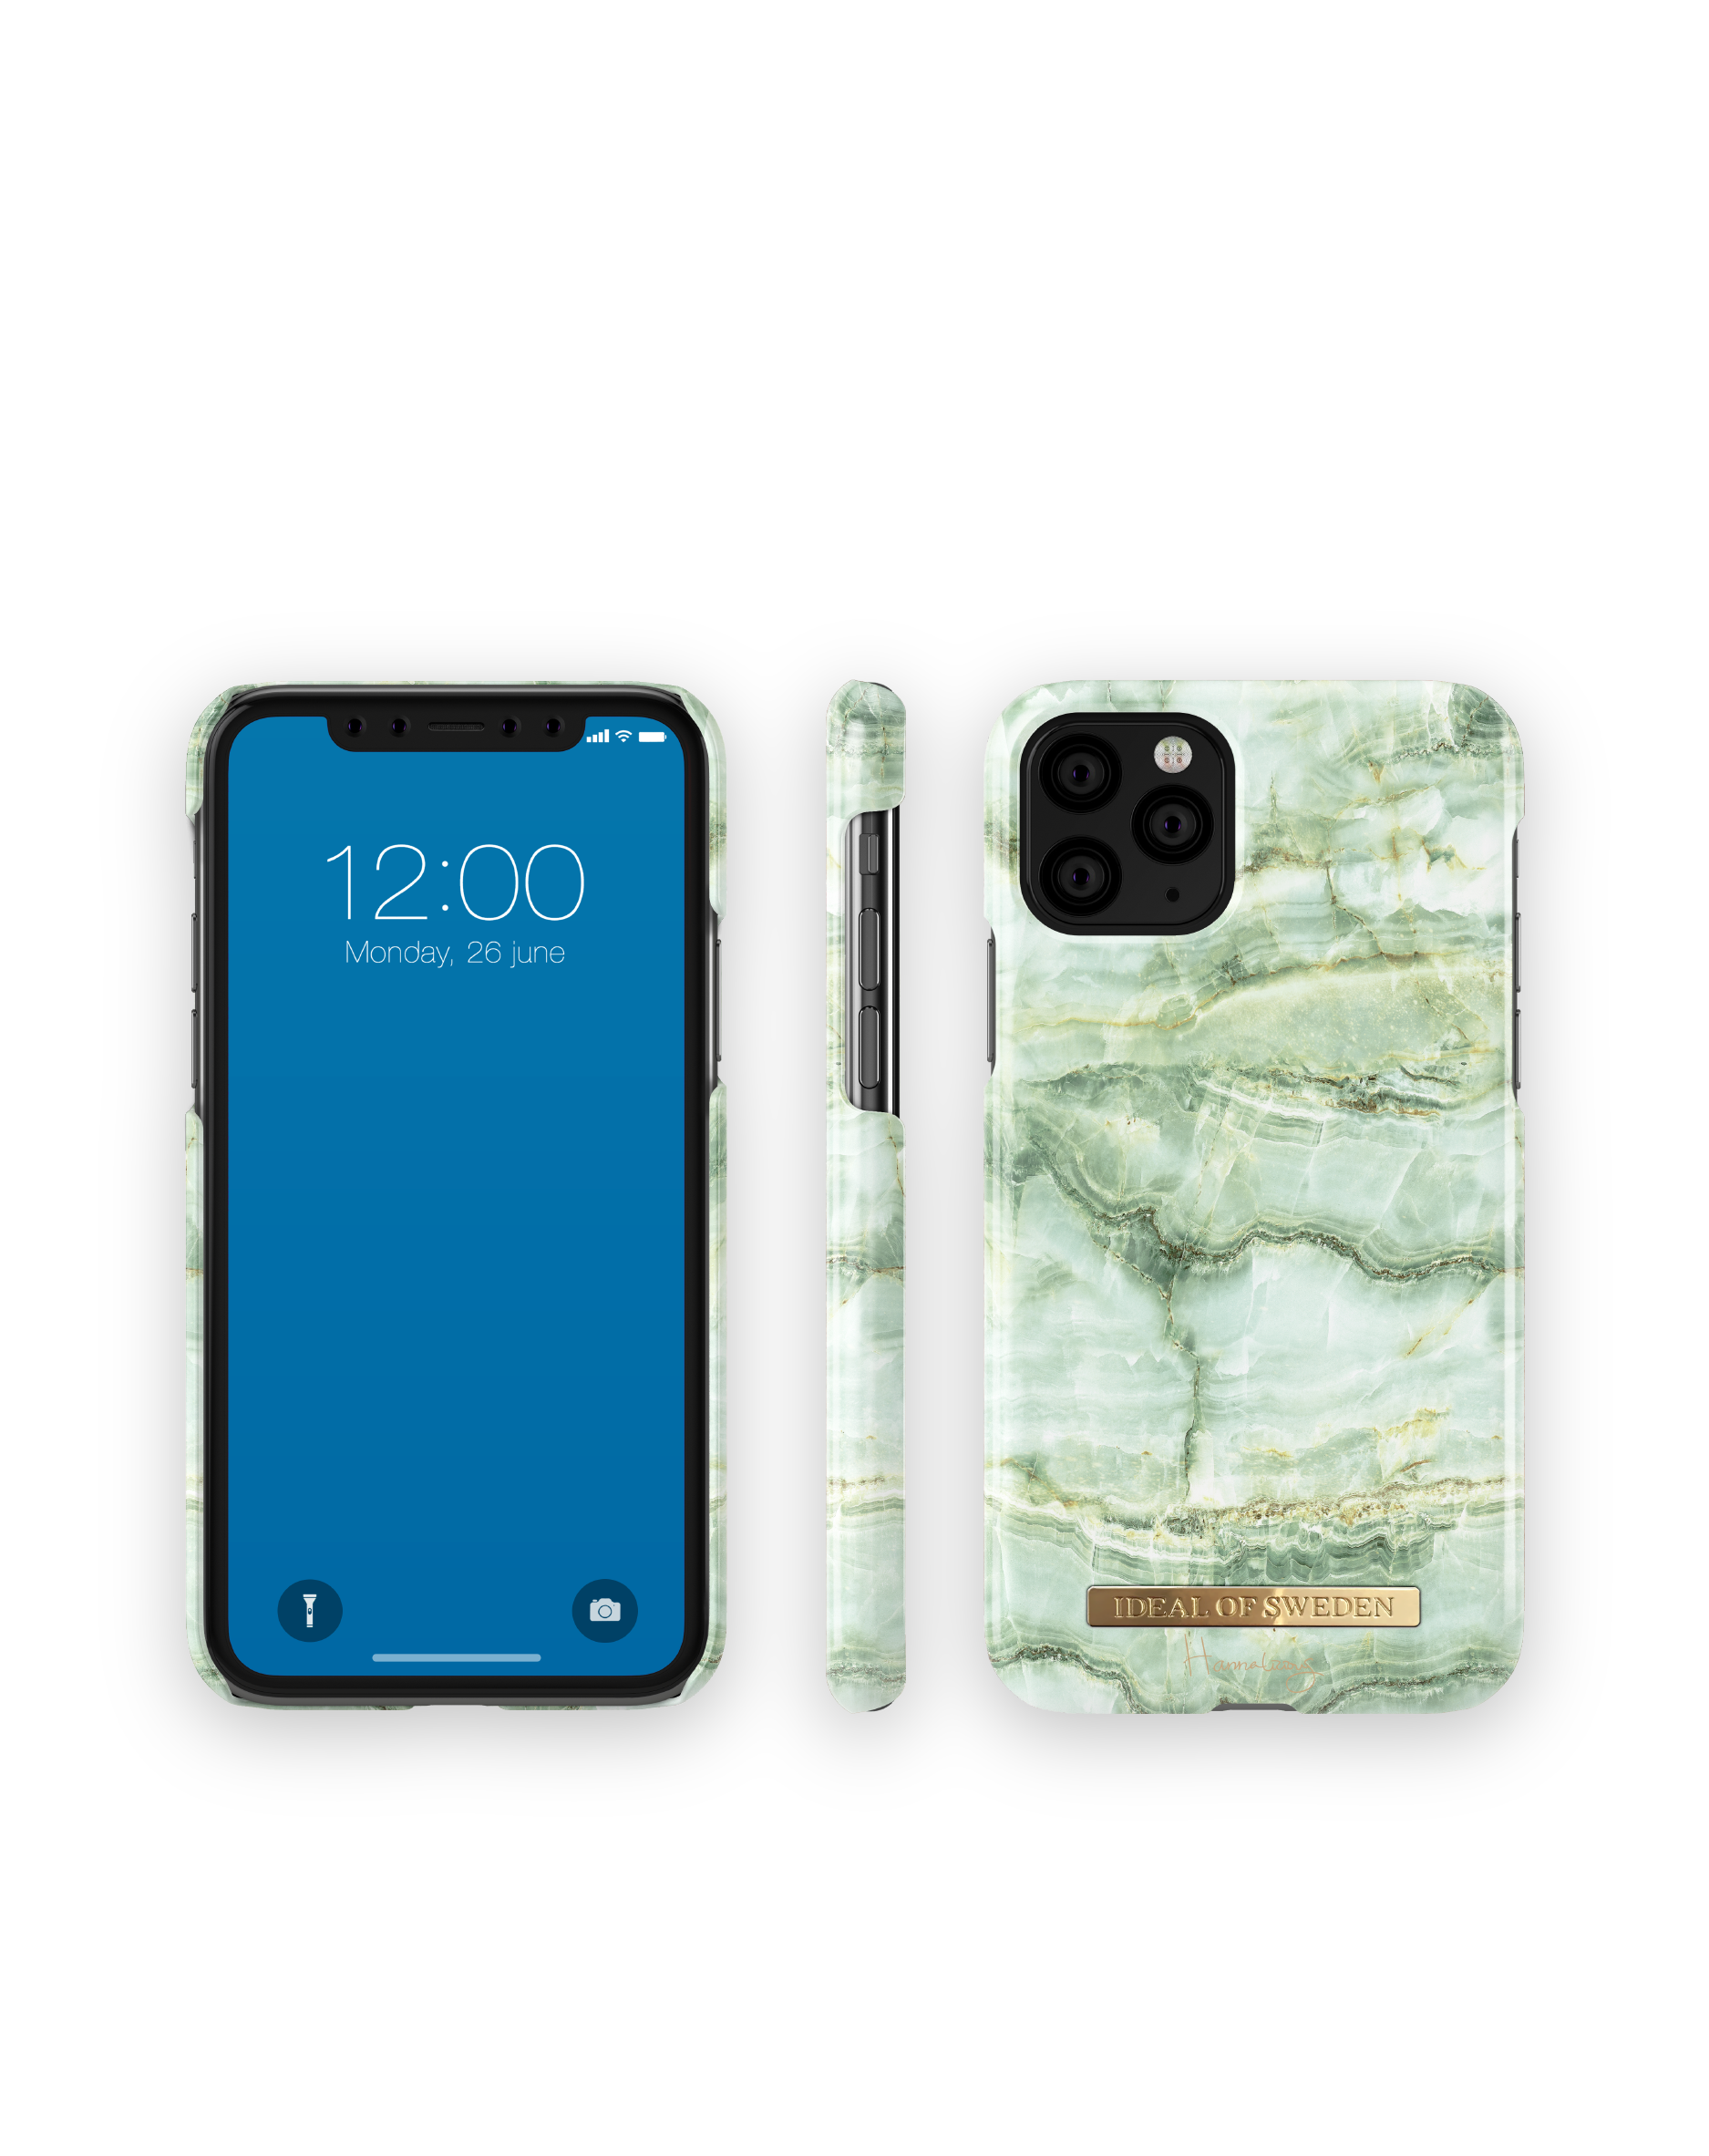 SWEDEN OF iPhone XS, iPhone X, Pro, IDEAL Marble Apple IDFCH2-I1958-125, 11 Backcover, Apple Mojito Apple, Apple iPhone